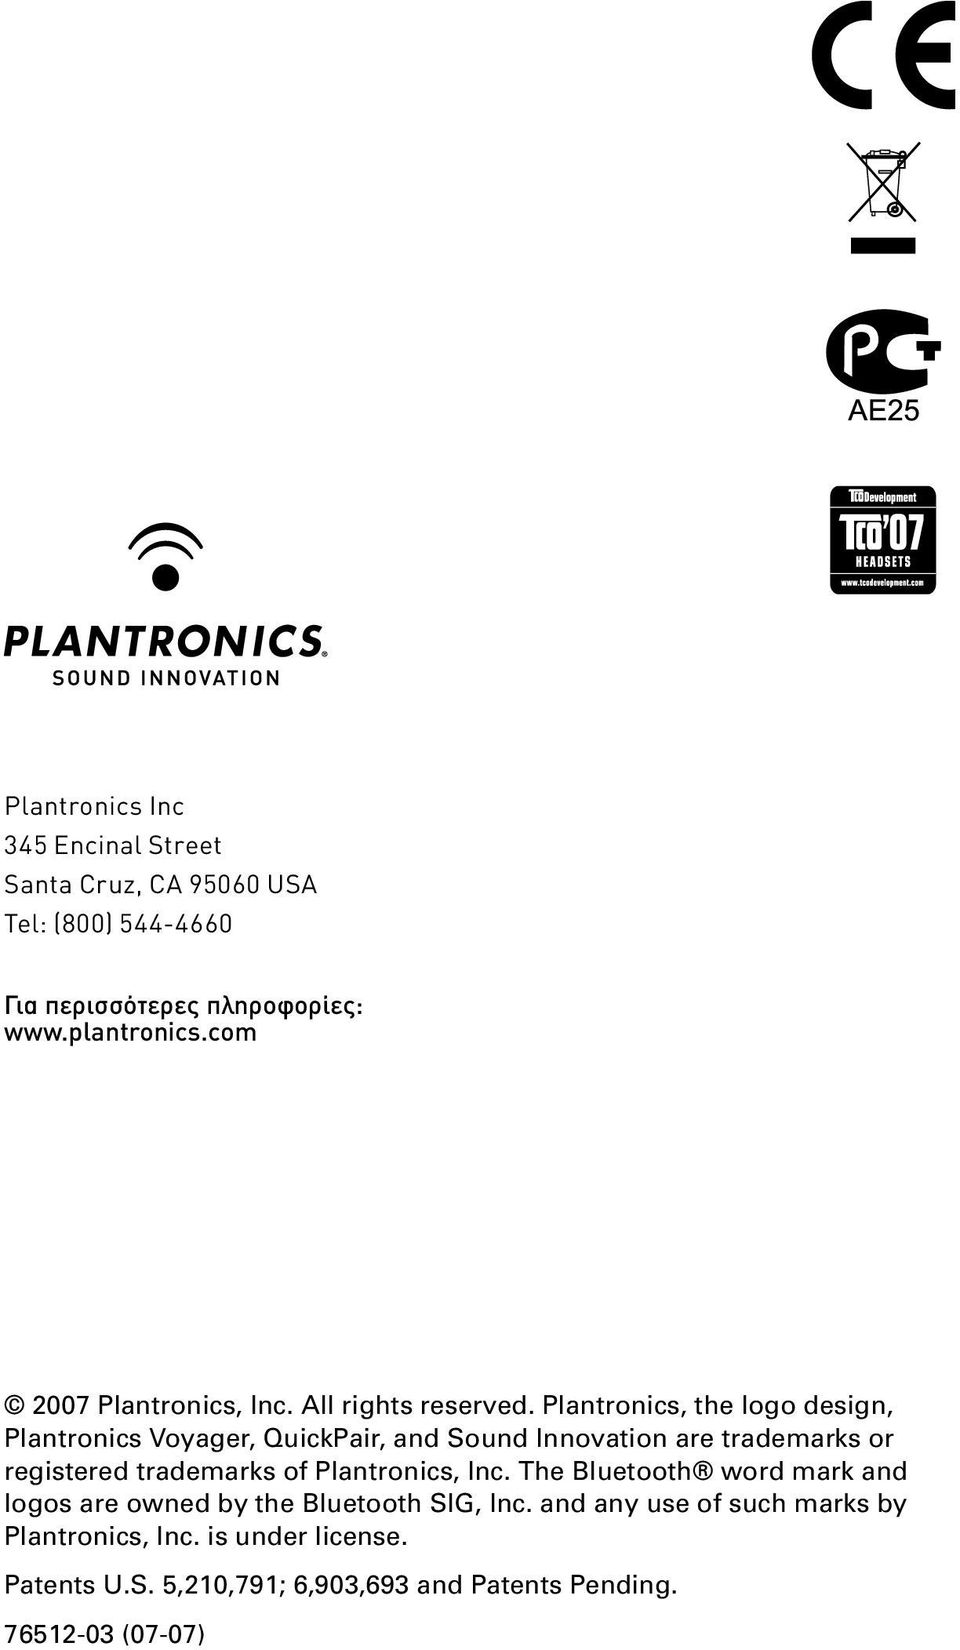 trademarks or registered trademarks of Plantronics, Inc The Bluetooth word mark and logos are owned by the Bluetooth SIG, Inc